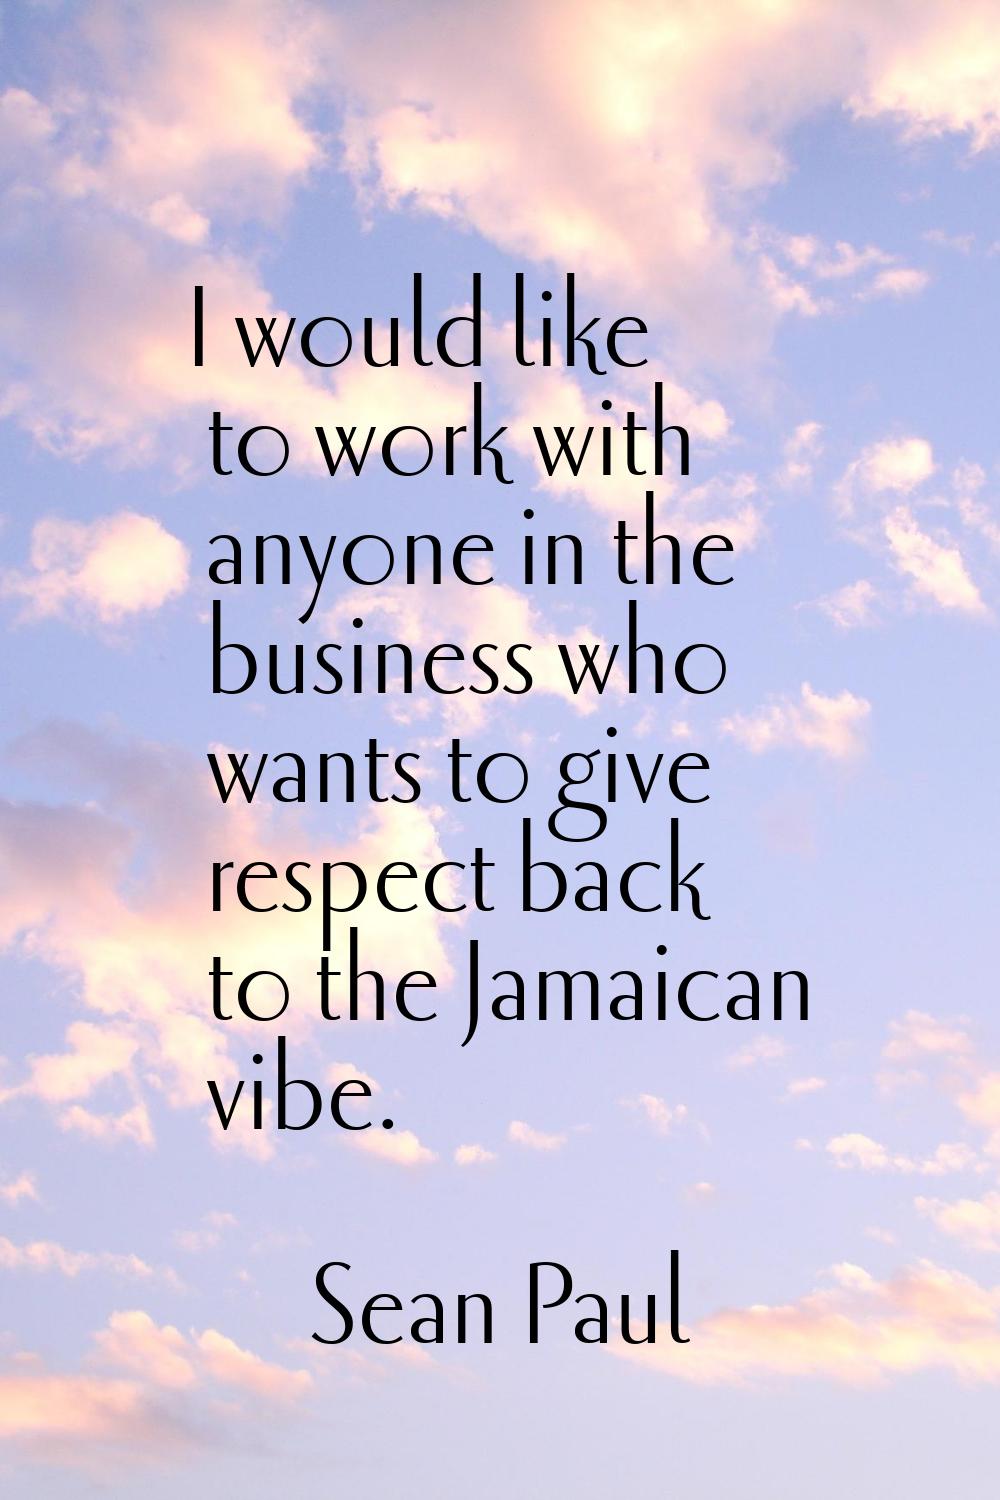 I would like to work with anyone in the business who wants to give respect back to the Jamaican vib